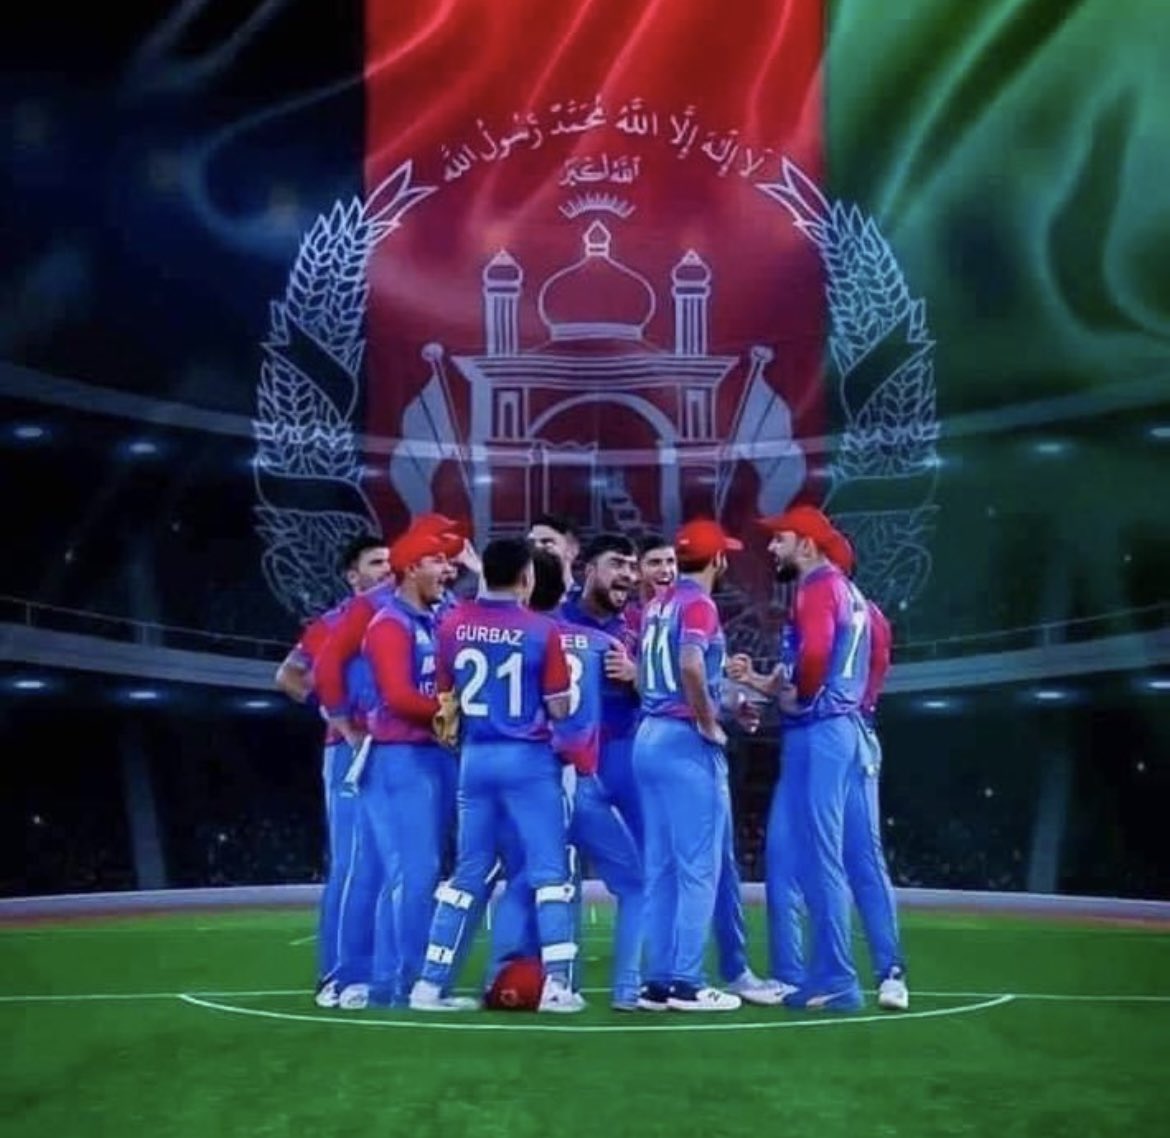 Afghanistan lost the third match vs Pakistan but won the hearts of millions! Overall, great performance in the series by the captain @rashidkhan_19 and Mr. Cool @MohammadNabi007 wishing speedy recovery to @iamnajibzadran